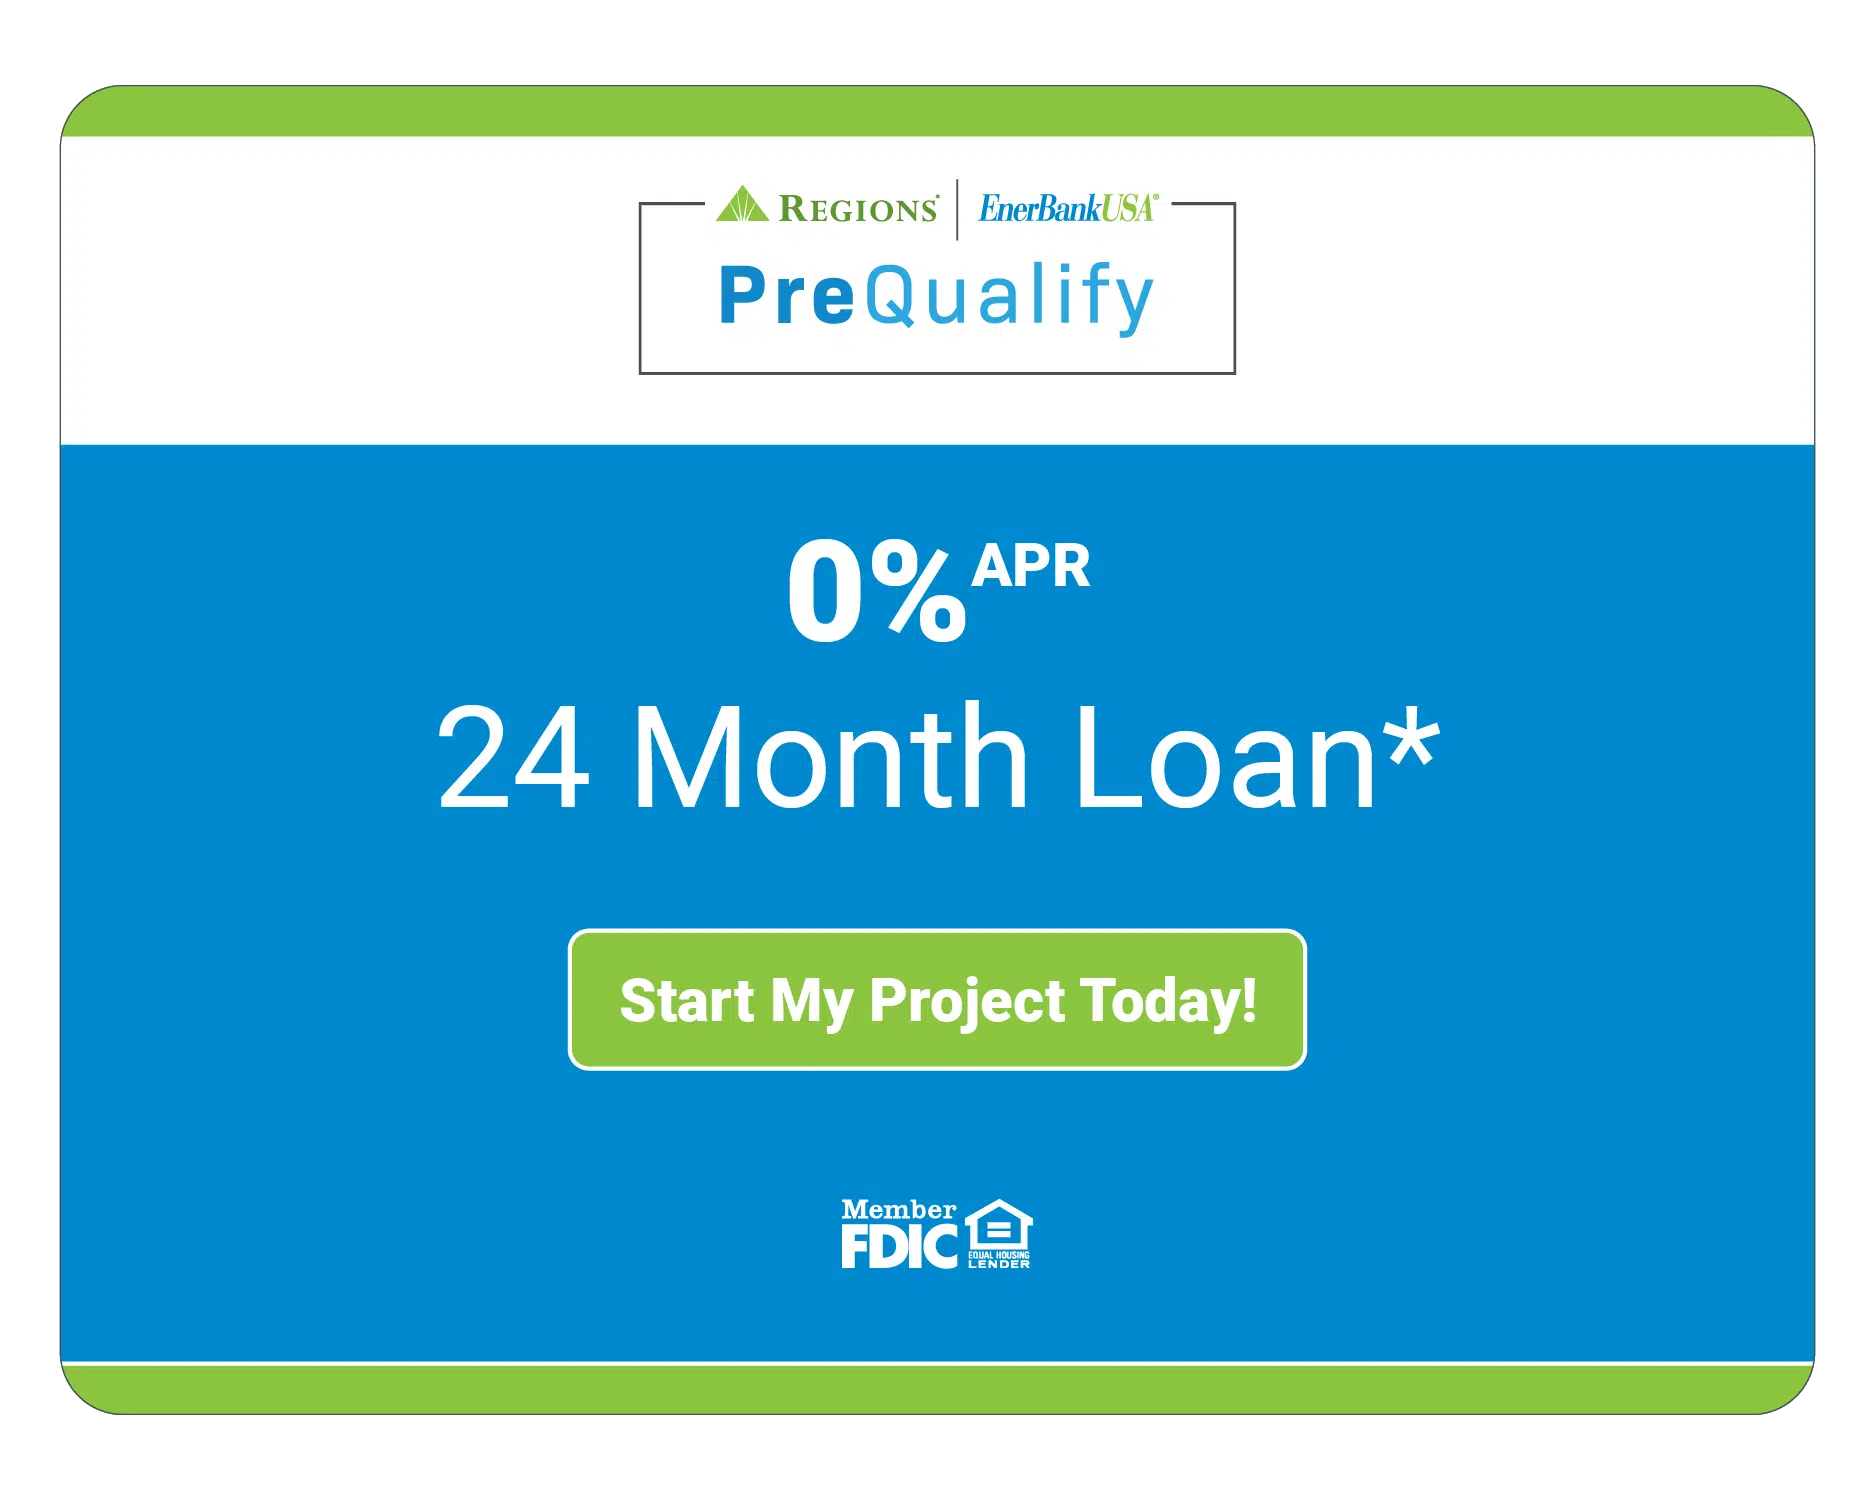 Financing your home project for 24 months - Footprint Decks and Design proudly serves Colorado Springs, Monument, Castlerock, Denver, Peyton, and Black Forrest.